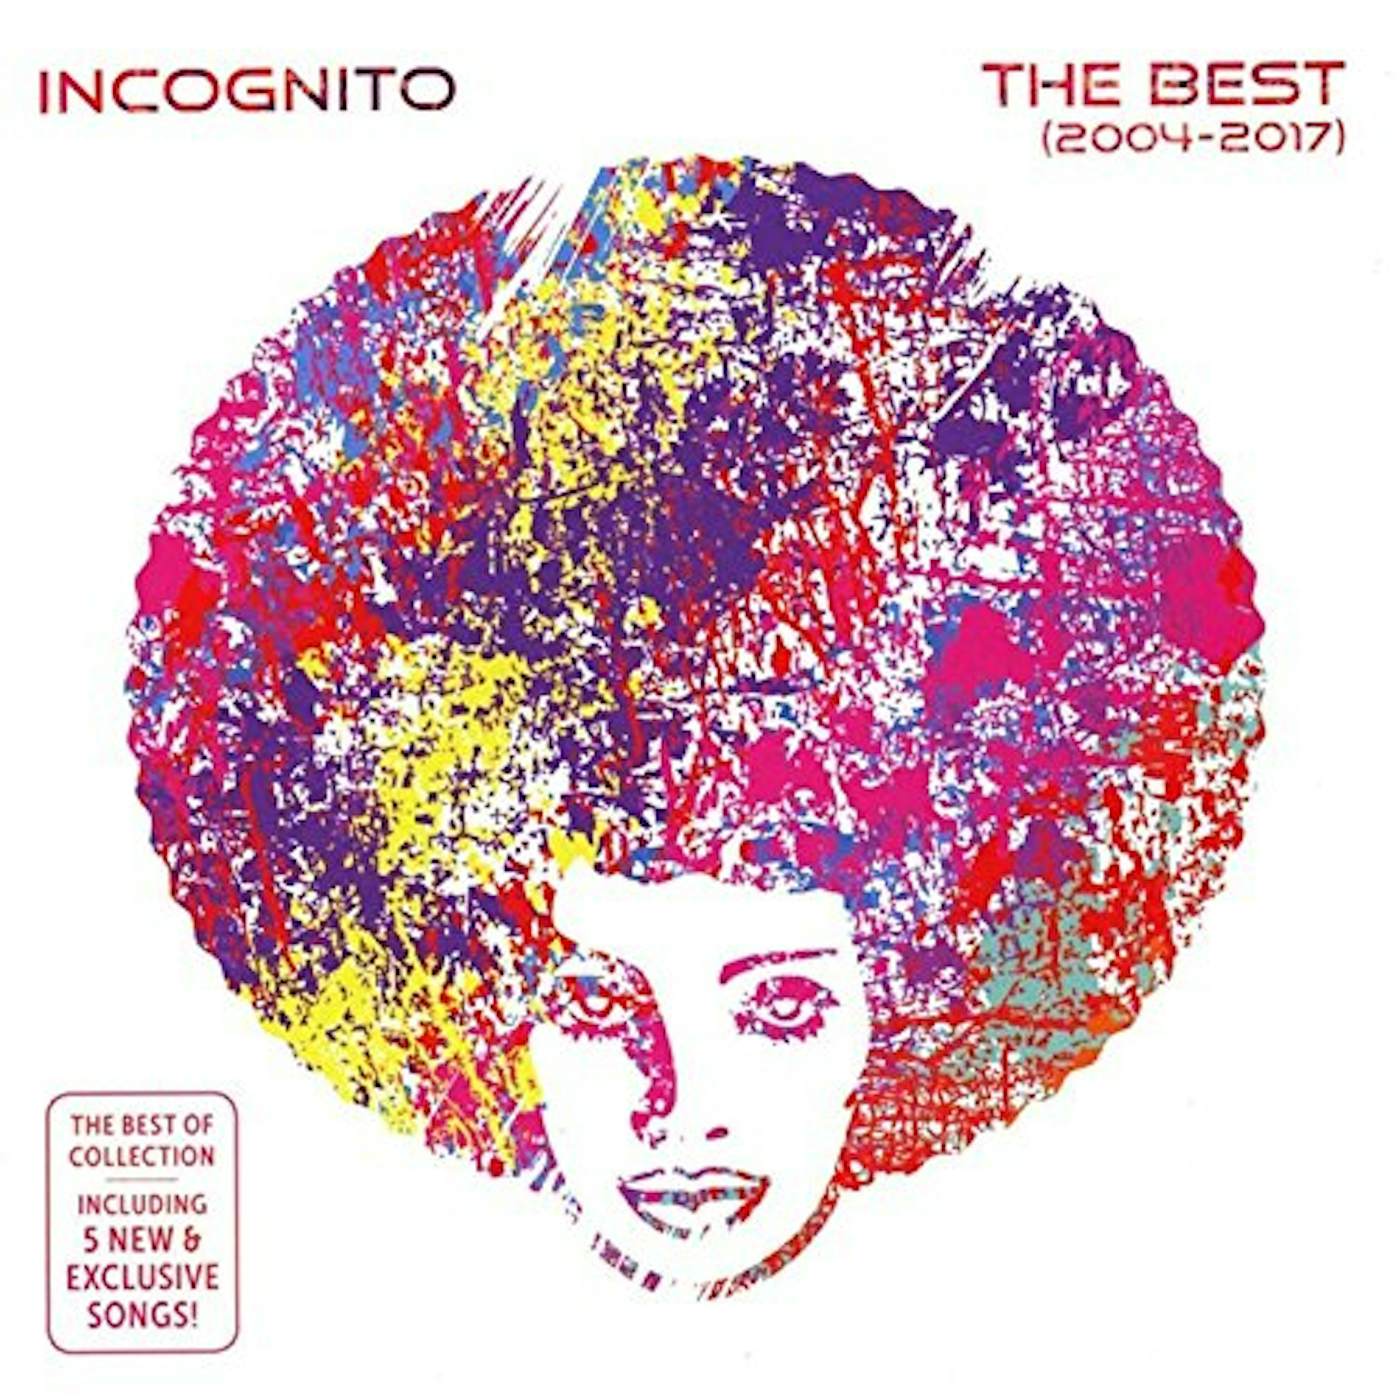 Incognito BEST CD